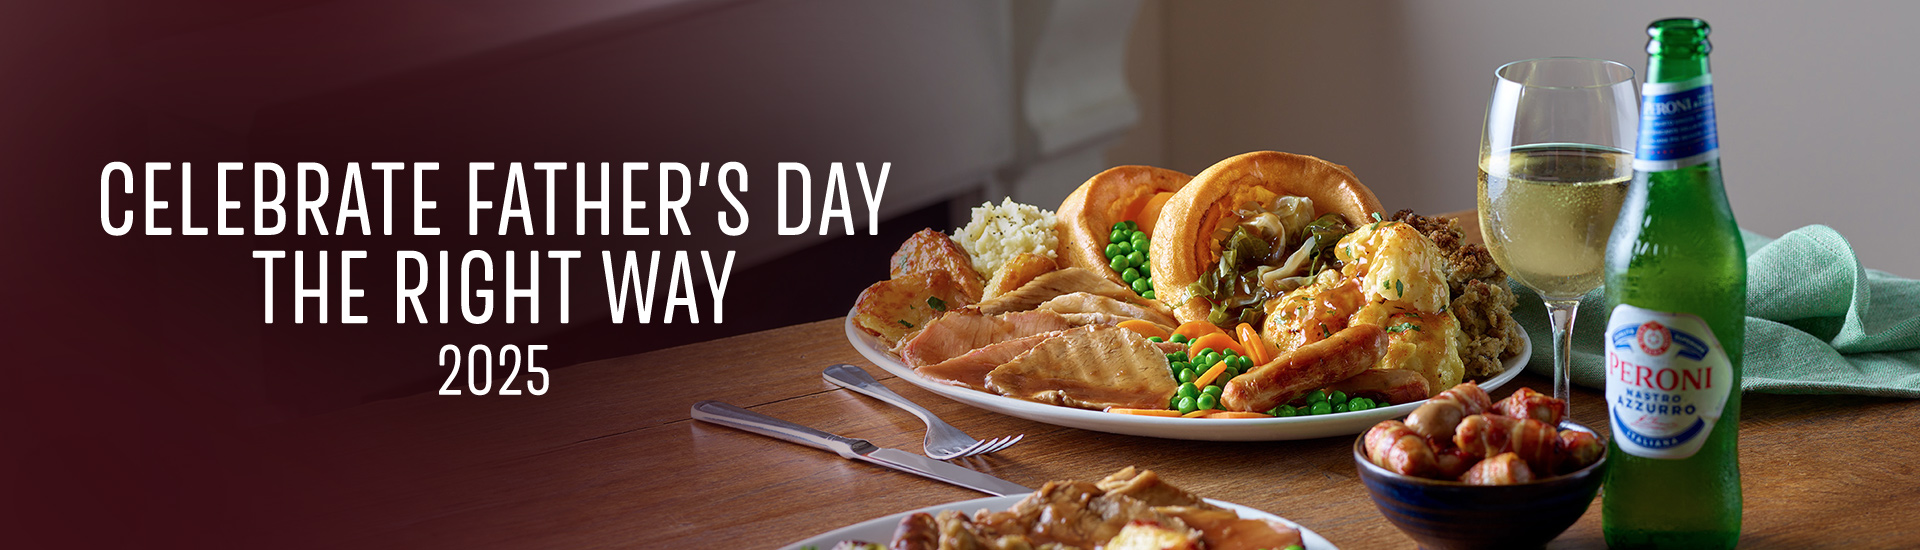 Father’s day carvery in Chelmsford